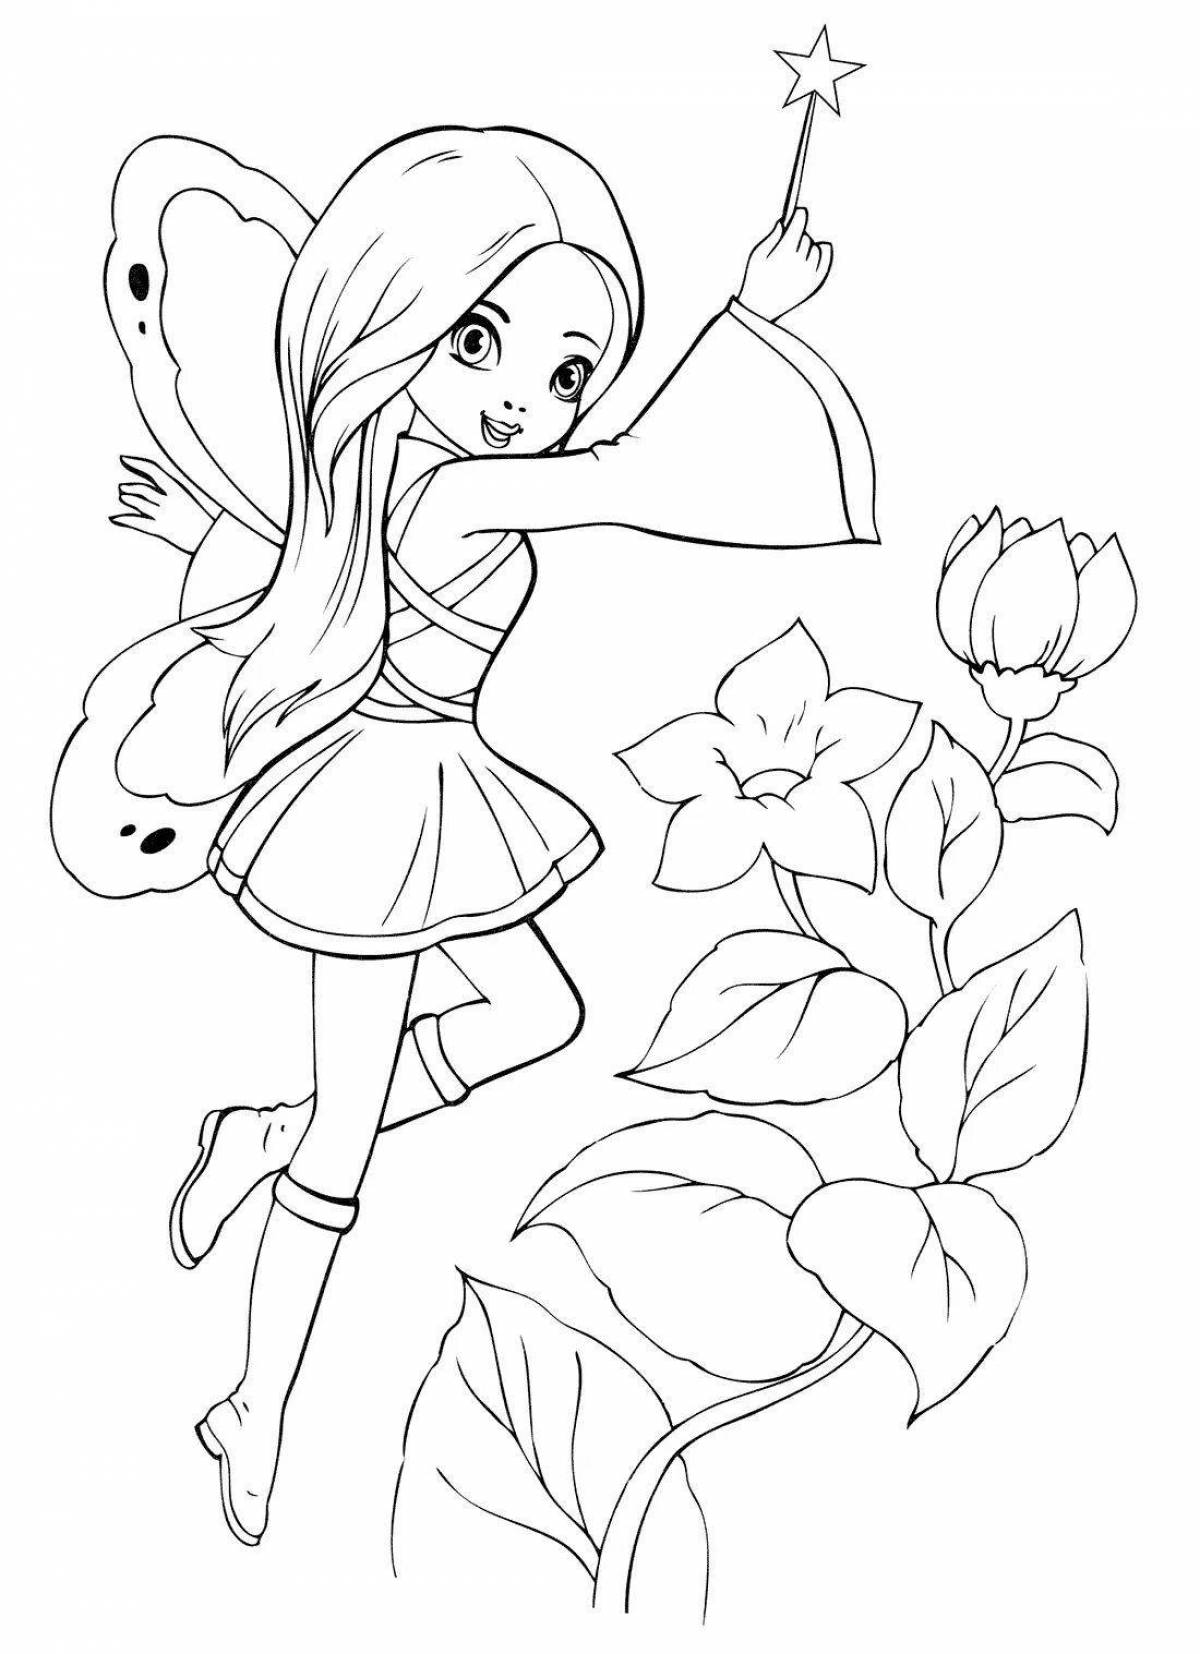 Glowing coloring for children 6-7 years old fairies